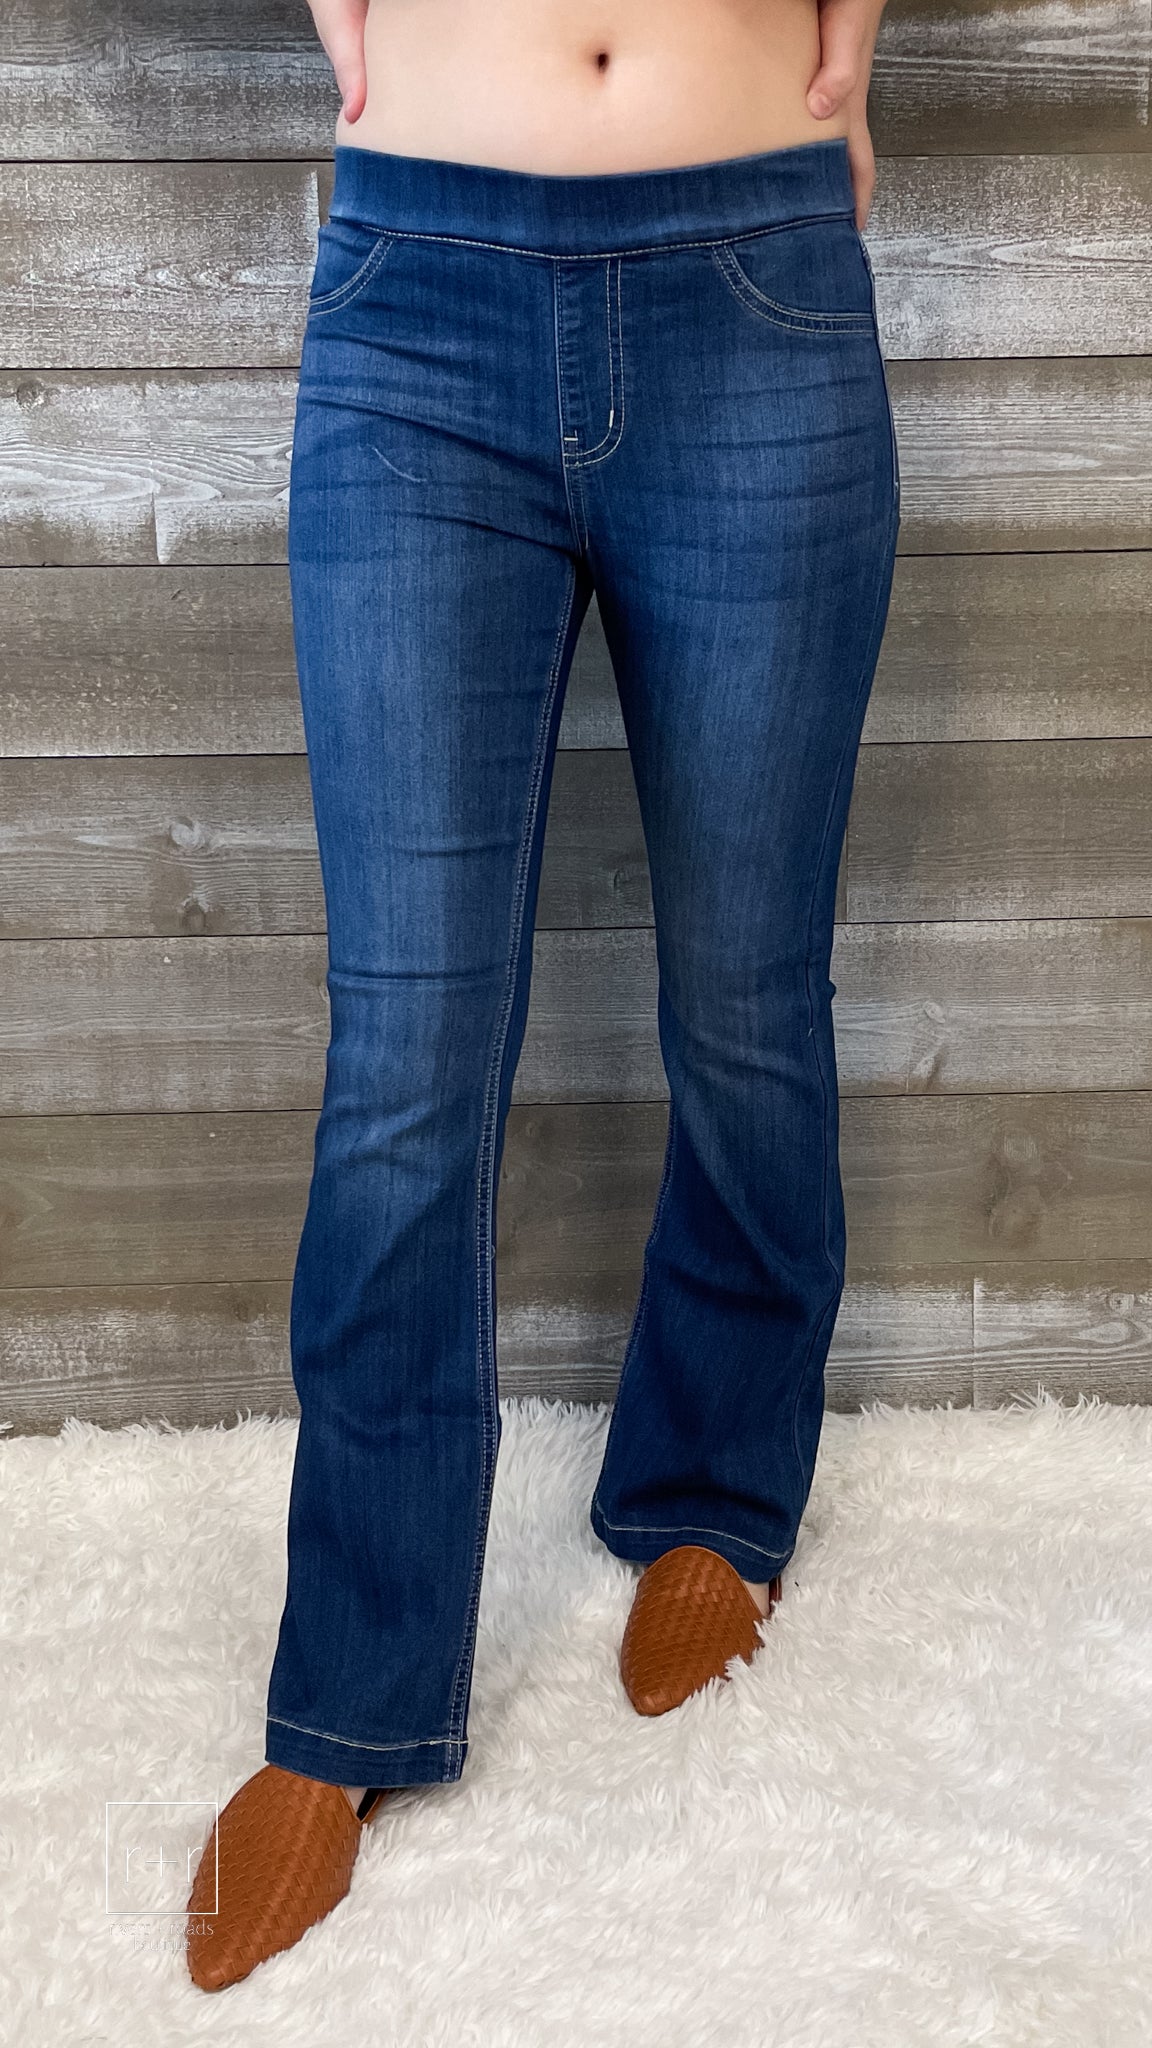 cello jeans dark wash pull on petite flare jeans in a jegging style AB35324DK - 30